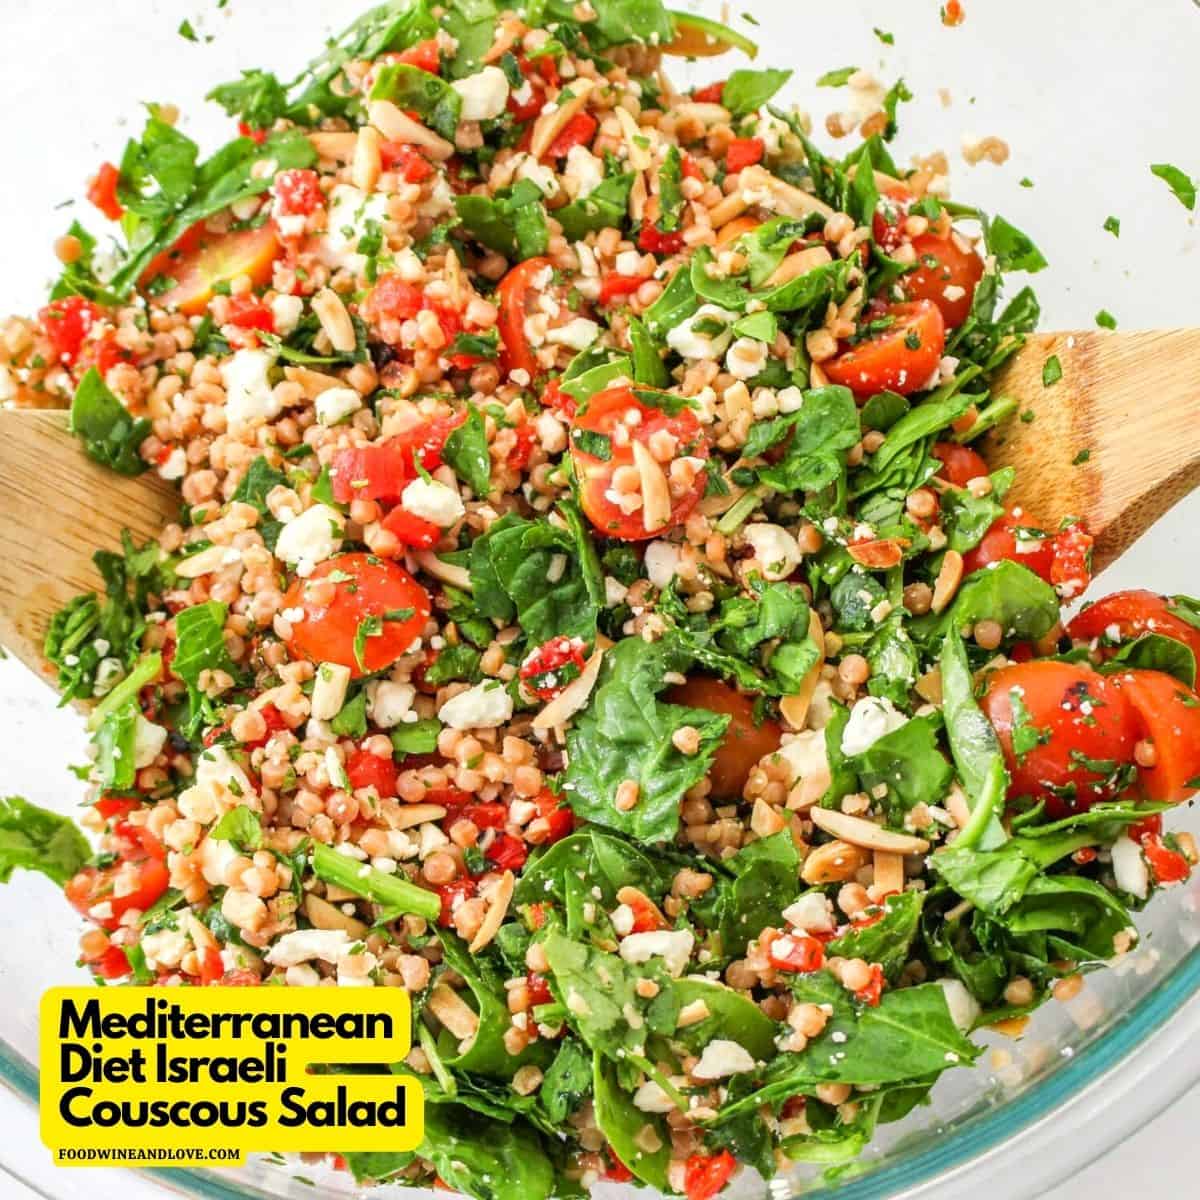 Mediterranean Diet Israeli Couscous Salad, a delicious and flavorful lunch or dinner recipe made with healthy ingredients.